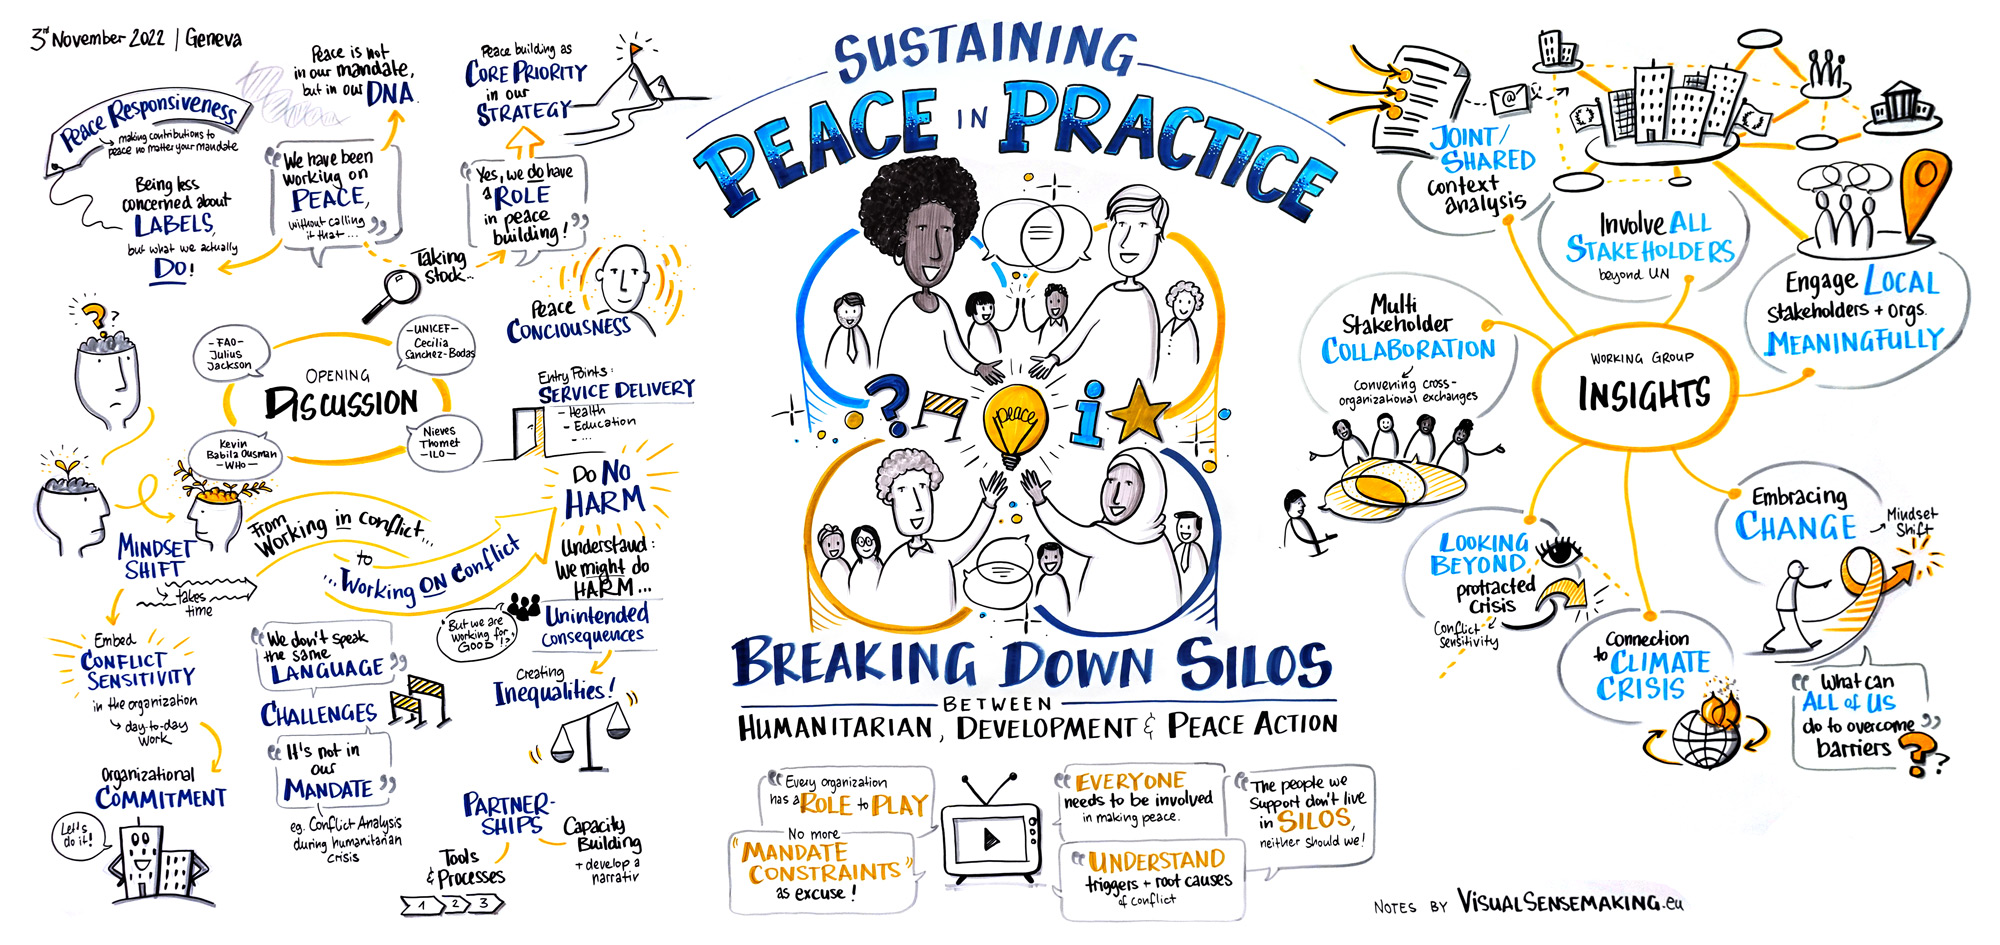 Visual summary of the 4 main panel discussions at the Good Trade Summit